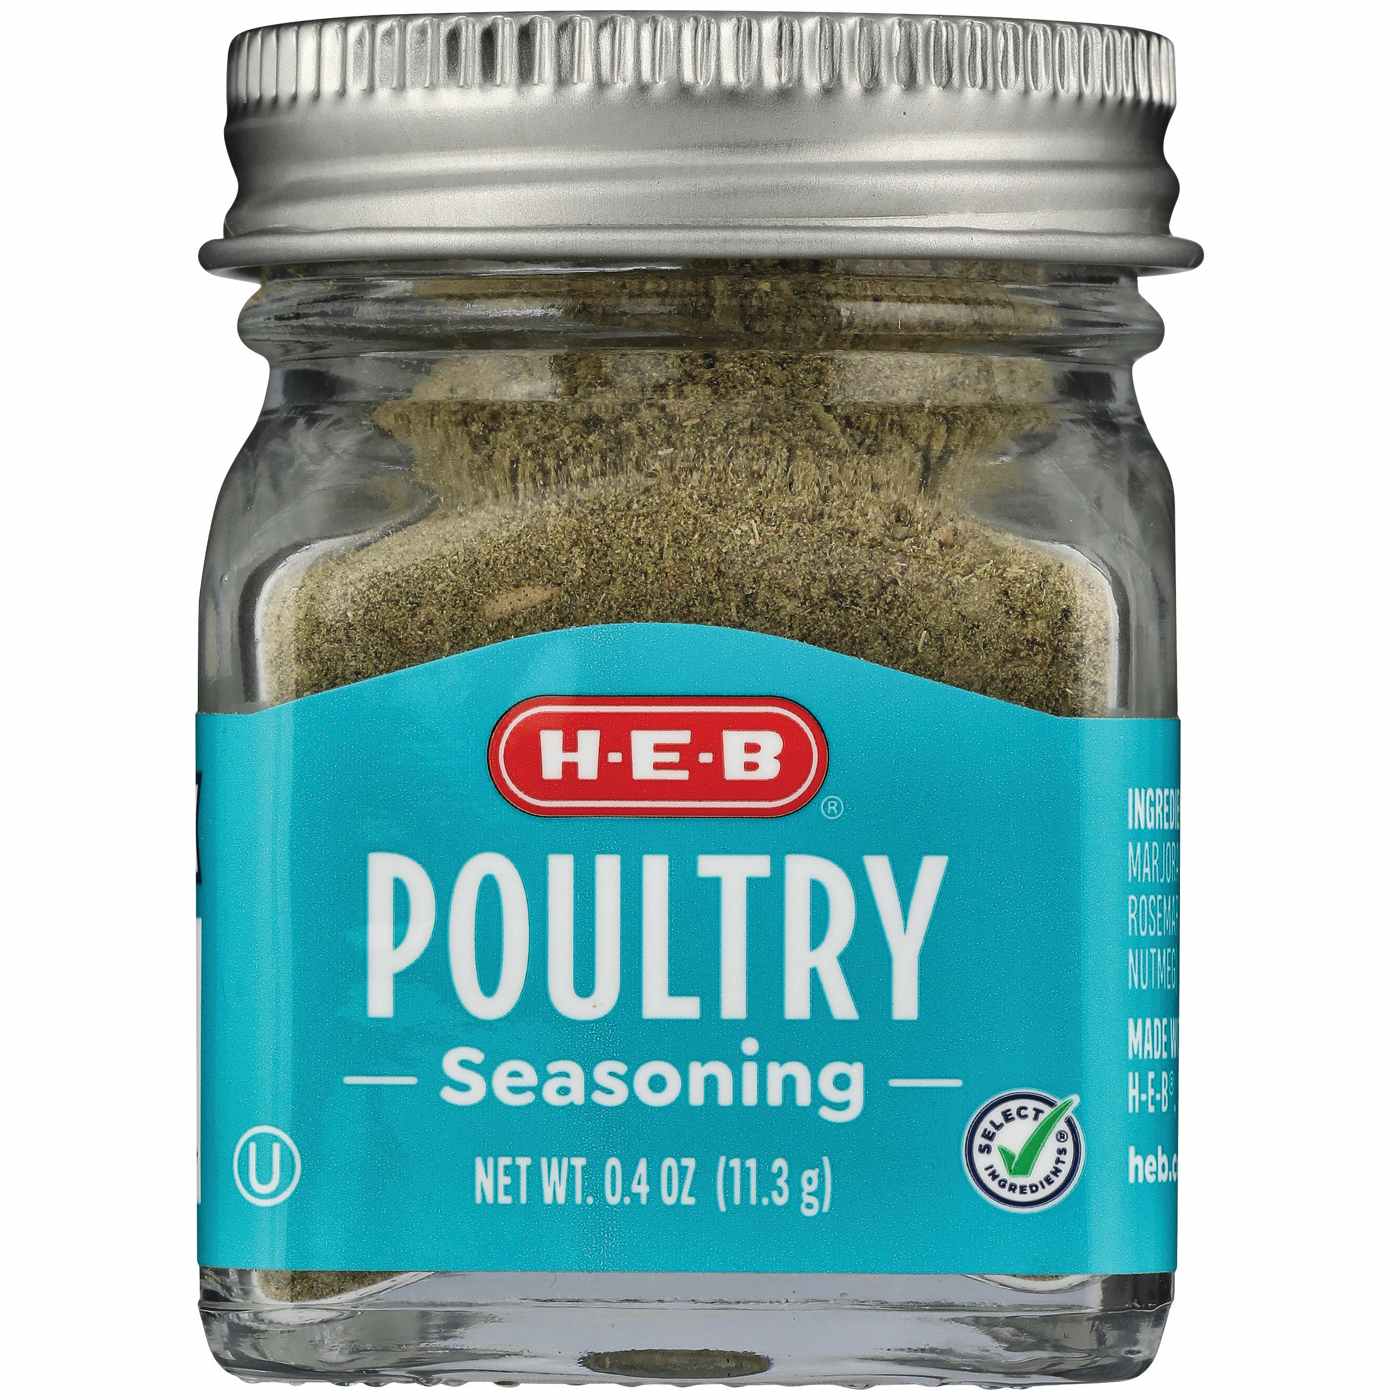 H-E-B Poultry Seasoning; image 1 of 2